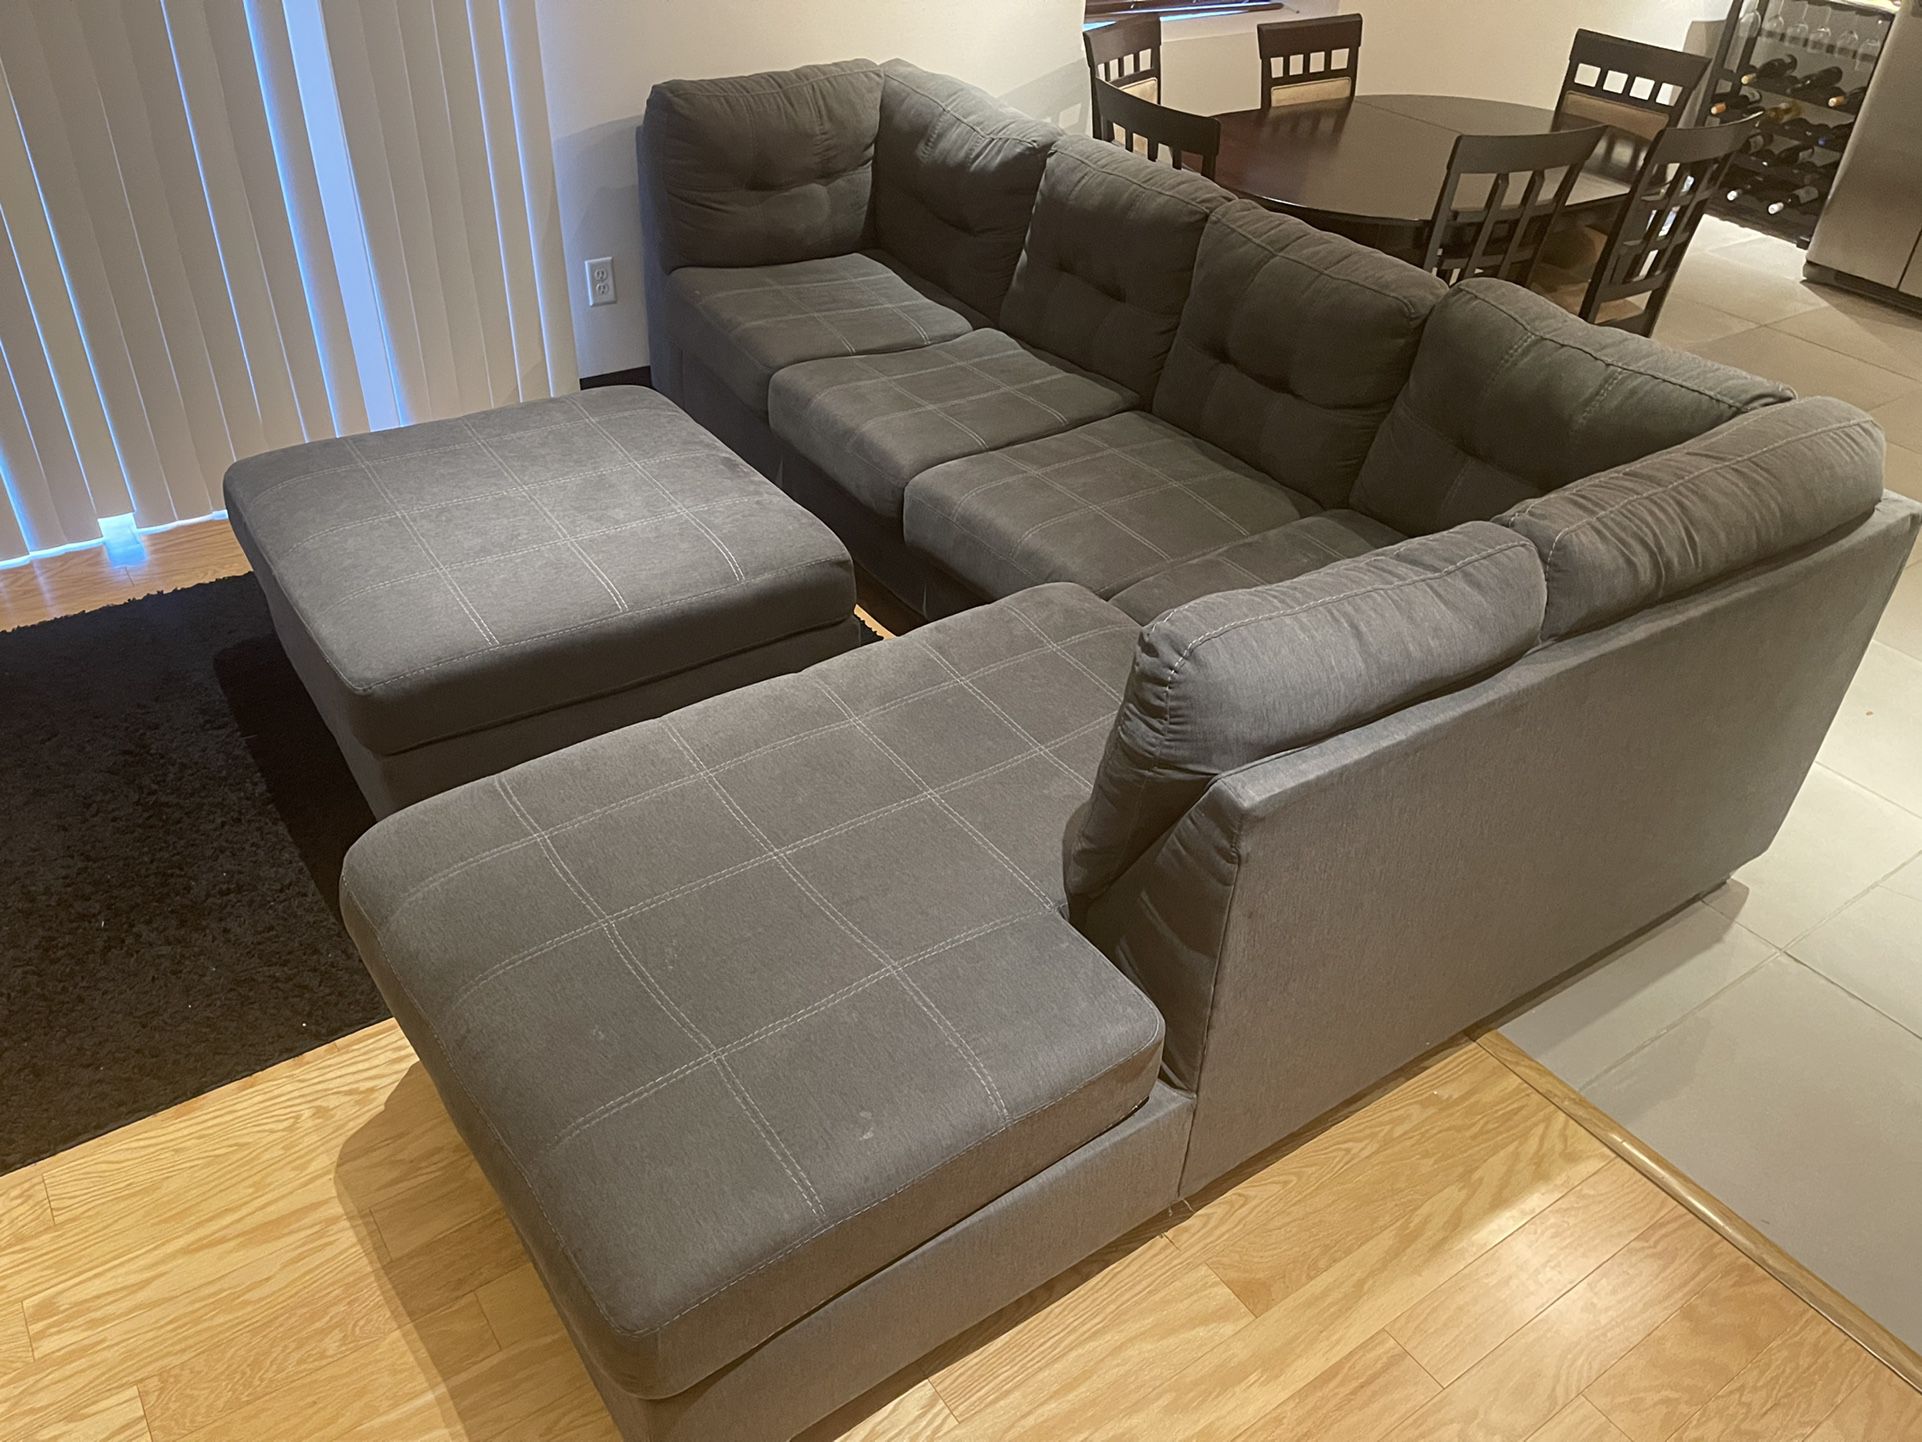 Couch With Matching Ottoman 